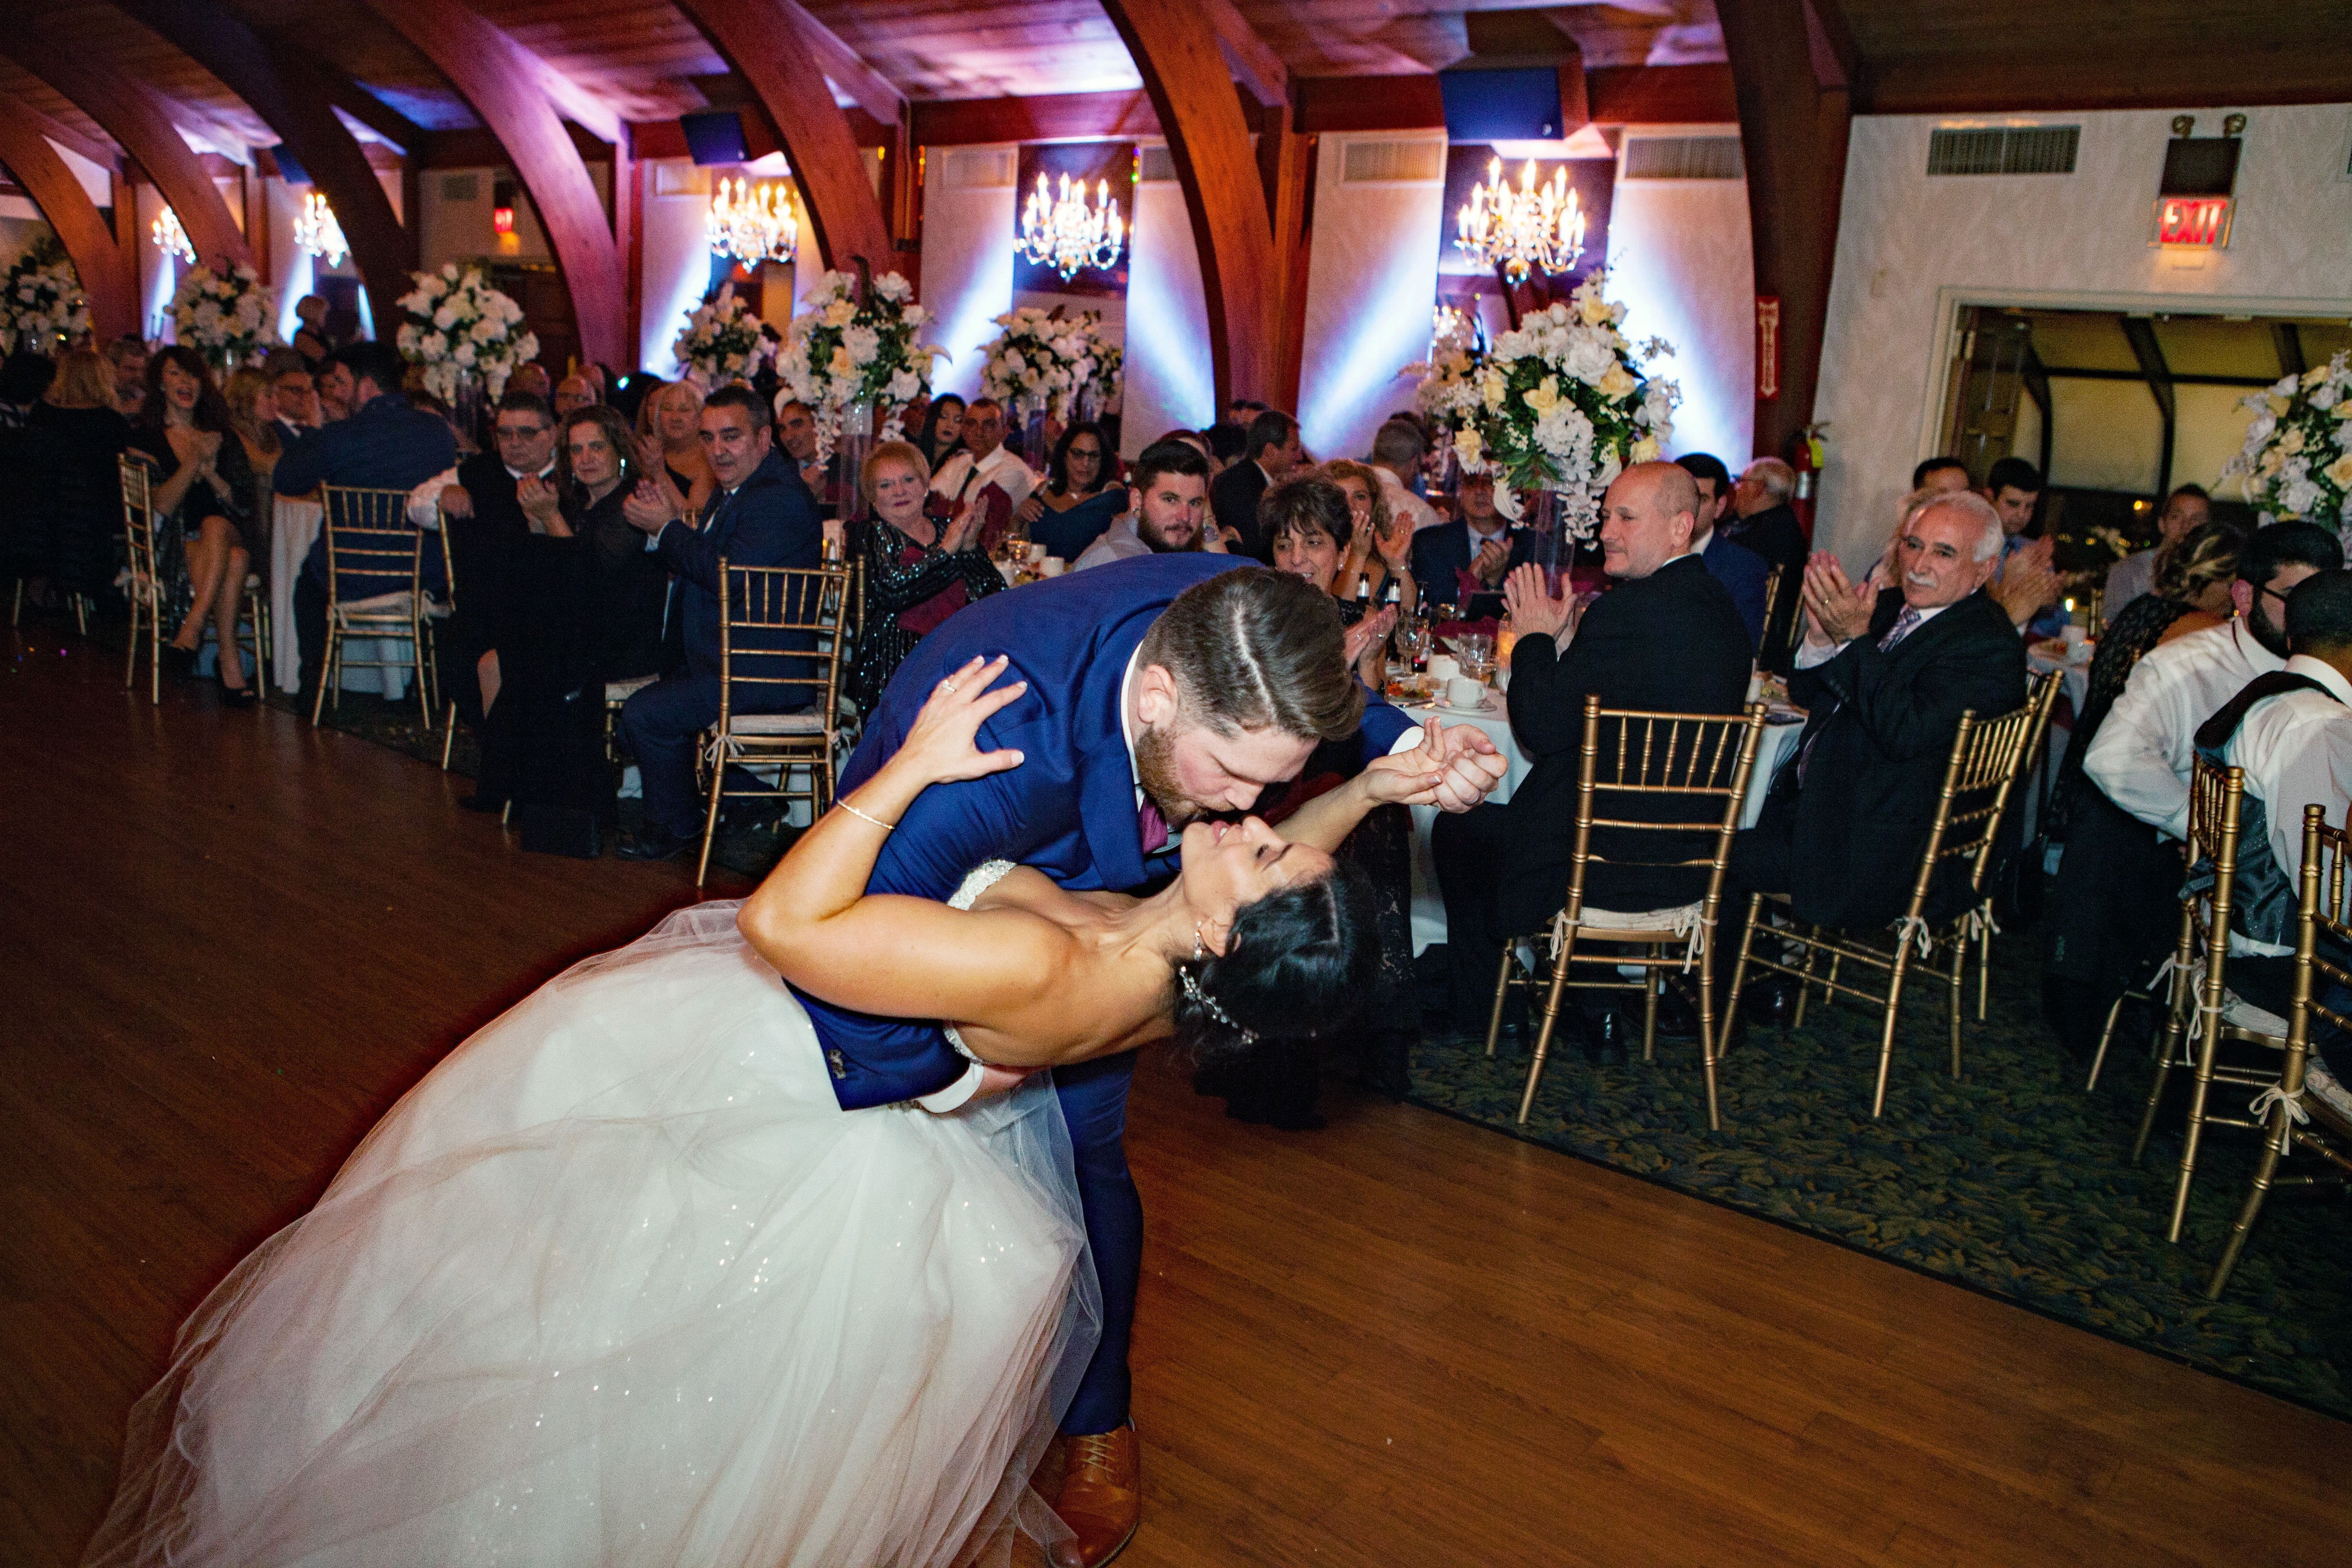 Wedding Photographers in Bucks County. Photography by Tylerstar Productions. Photo taken at Brookside Manor in Feasterville-Trevose, PA